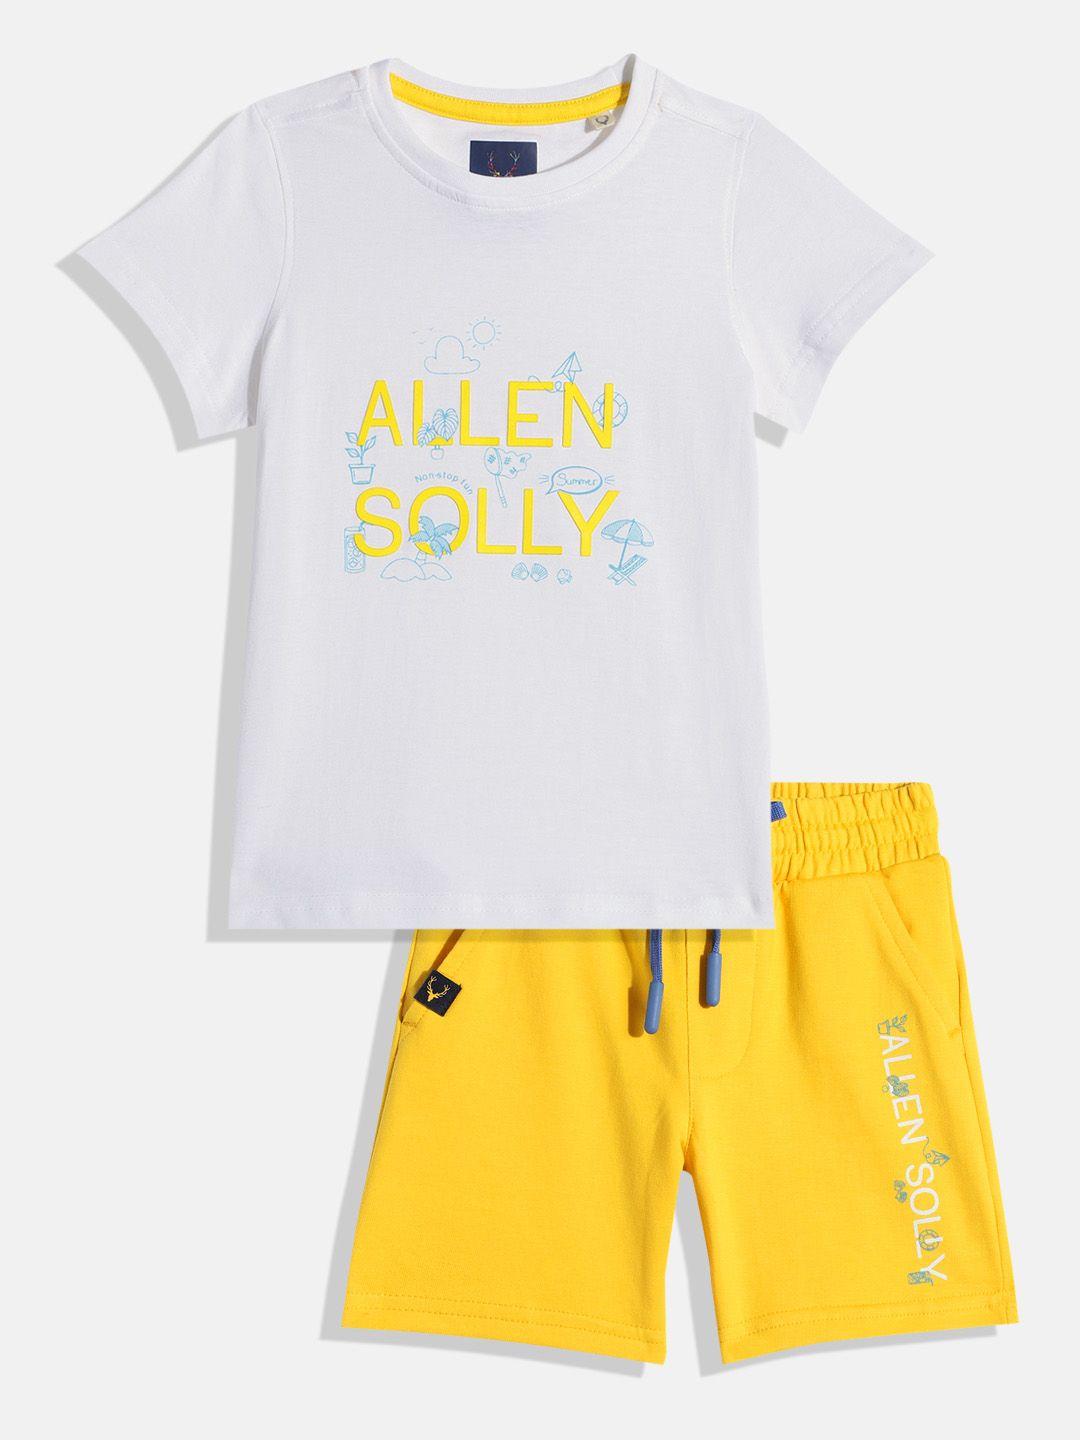 allen-solly-junior-boys-white-&-yellow-pure-cotton-t-shirt-with-shorts